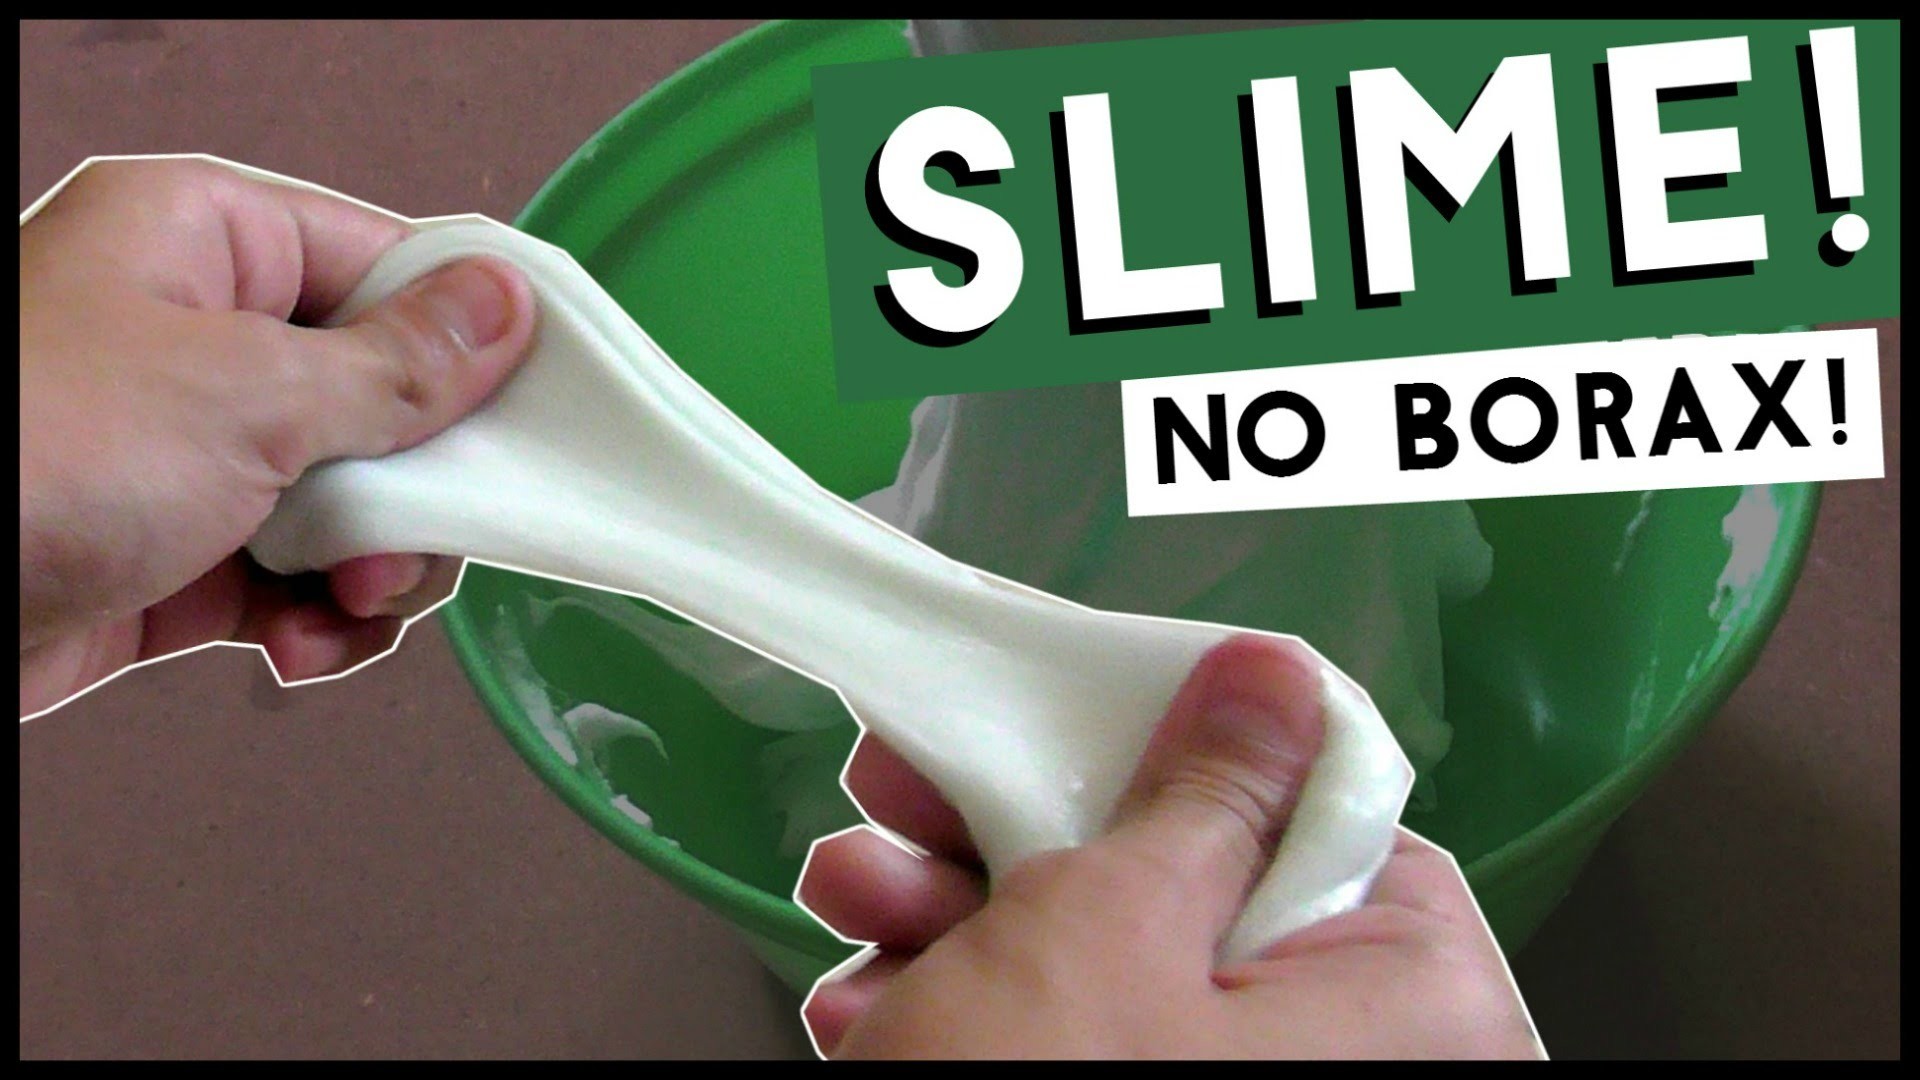 how to make slime without glue or activator